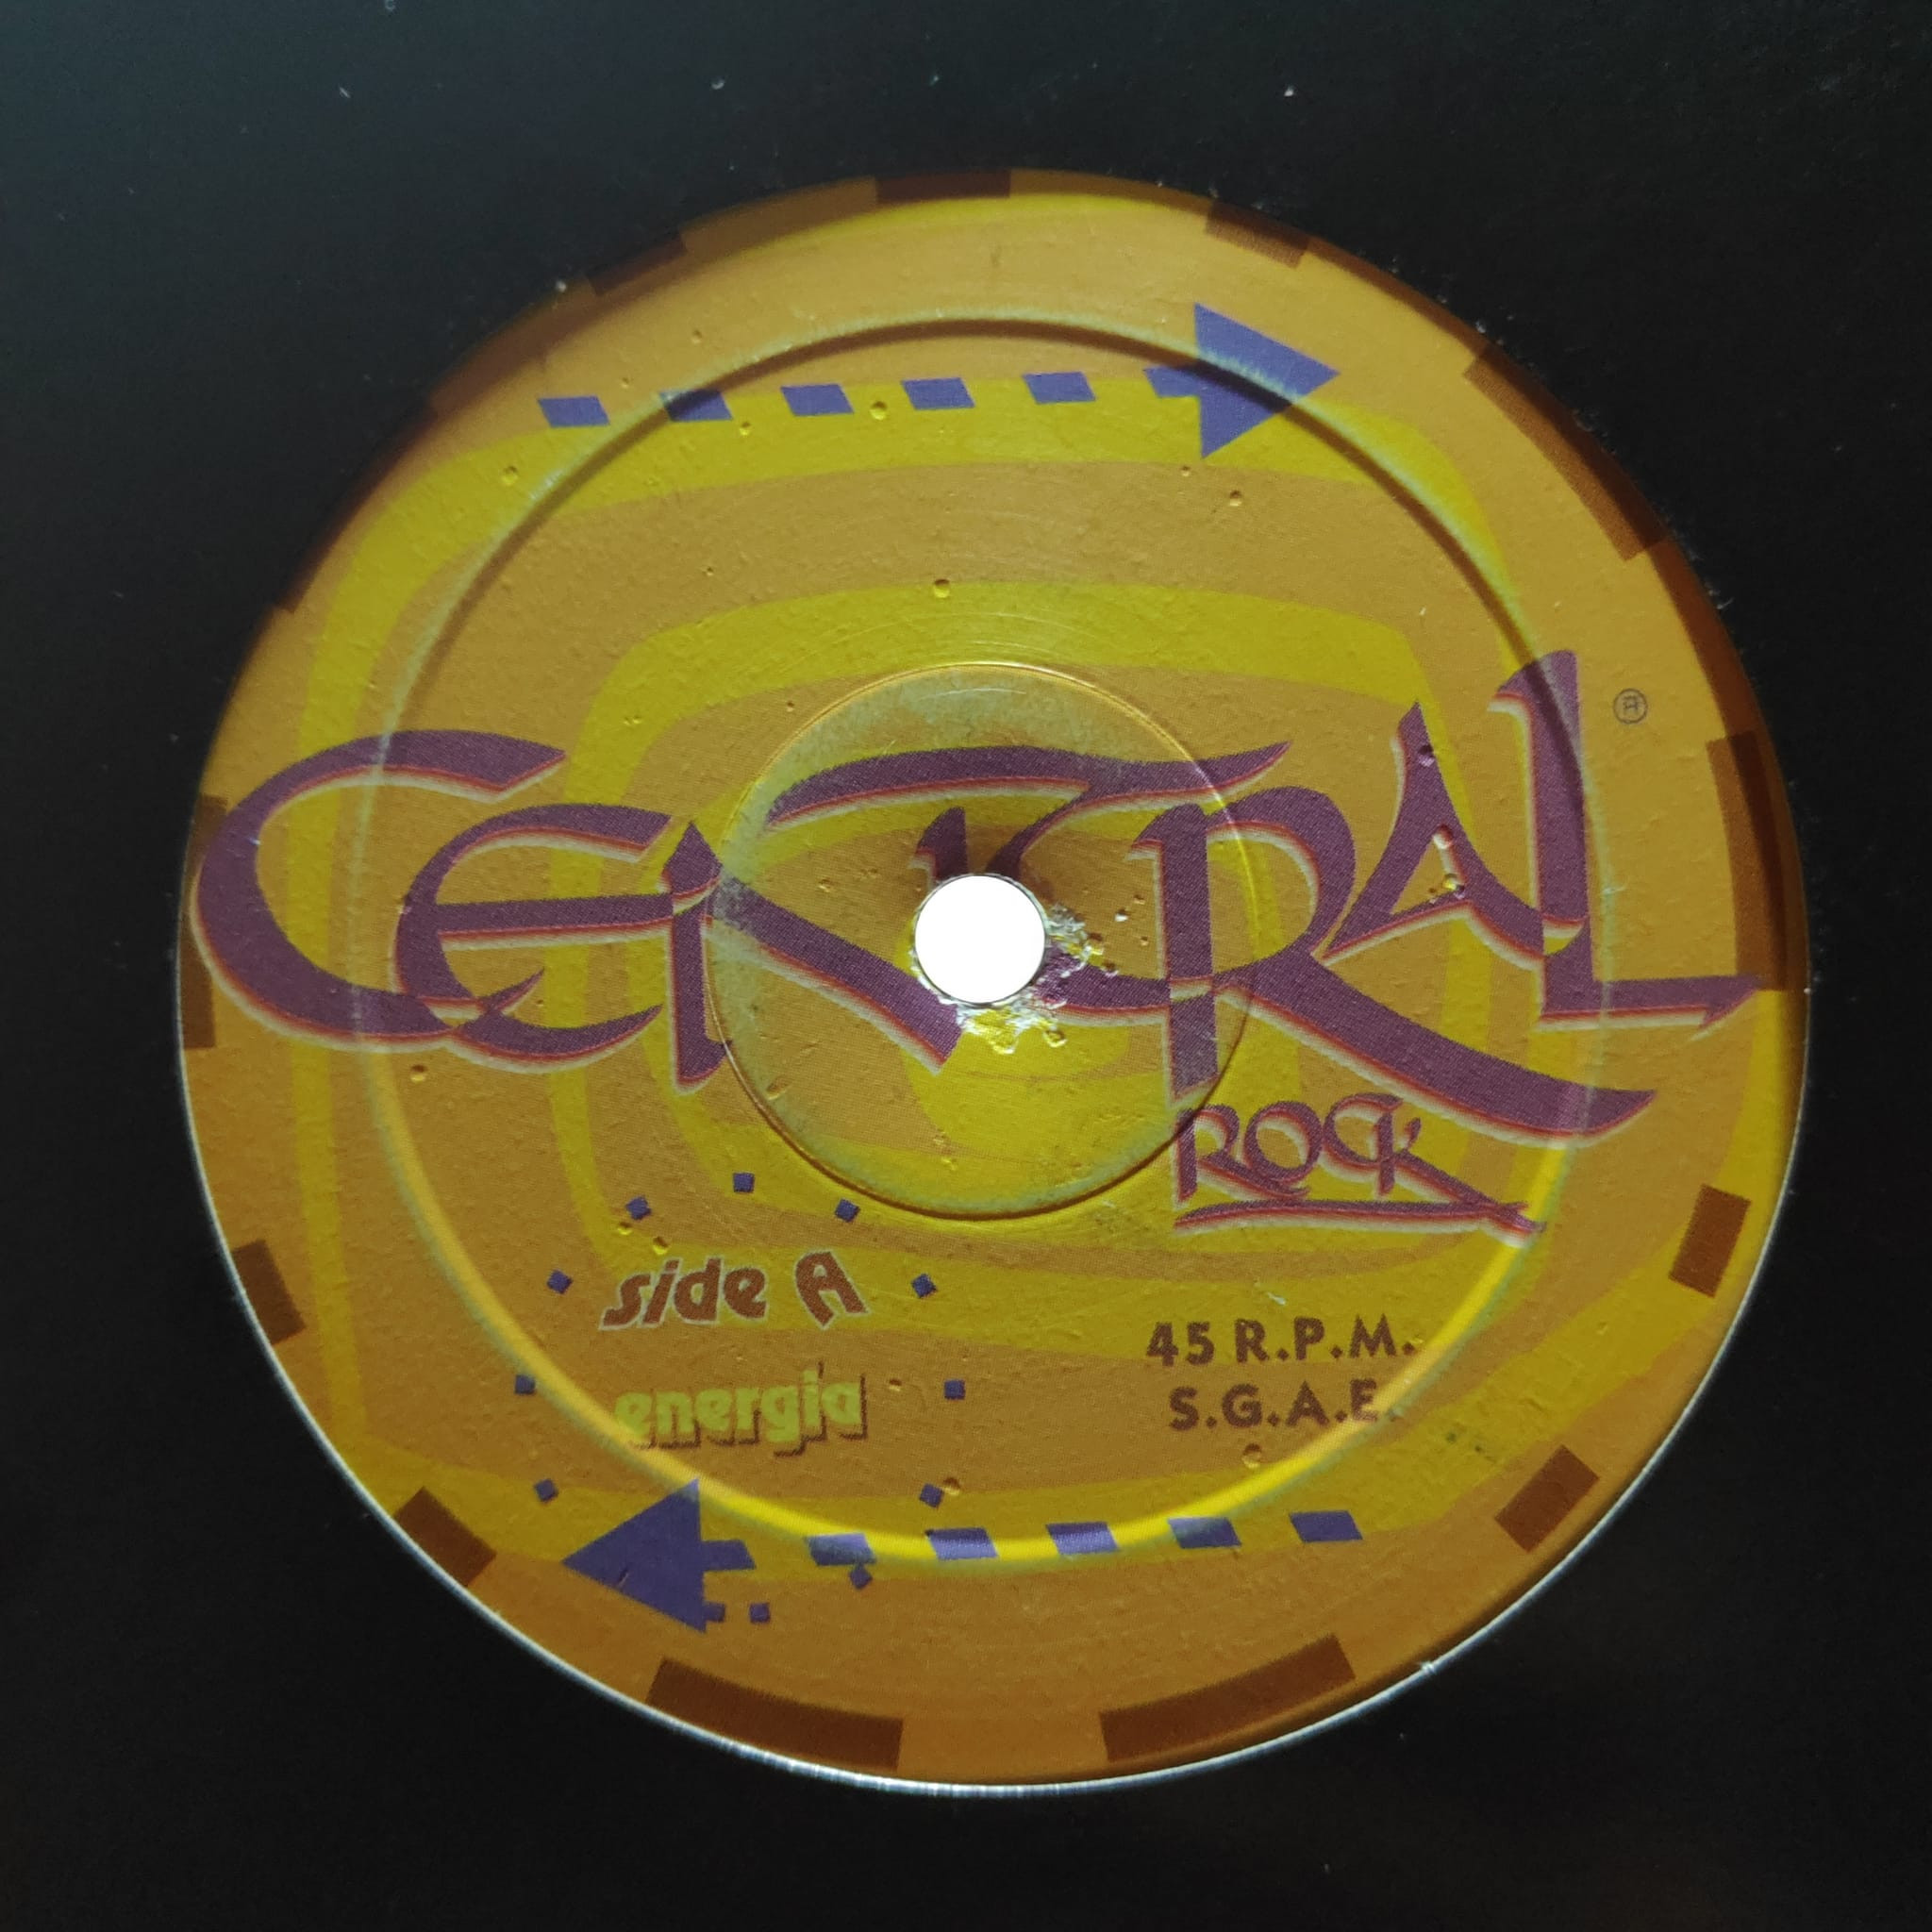 (MUT403) Central Rock – Energia